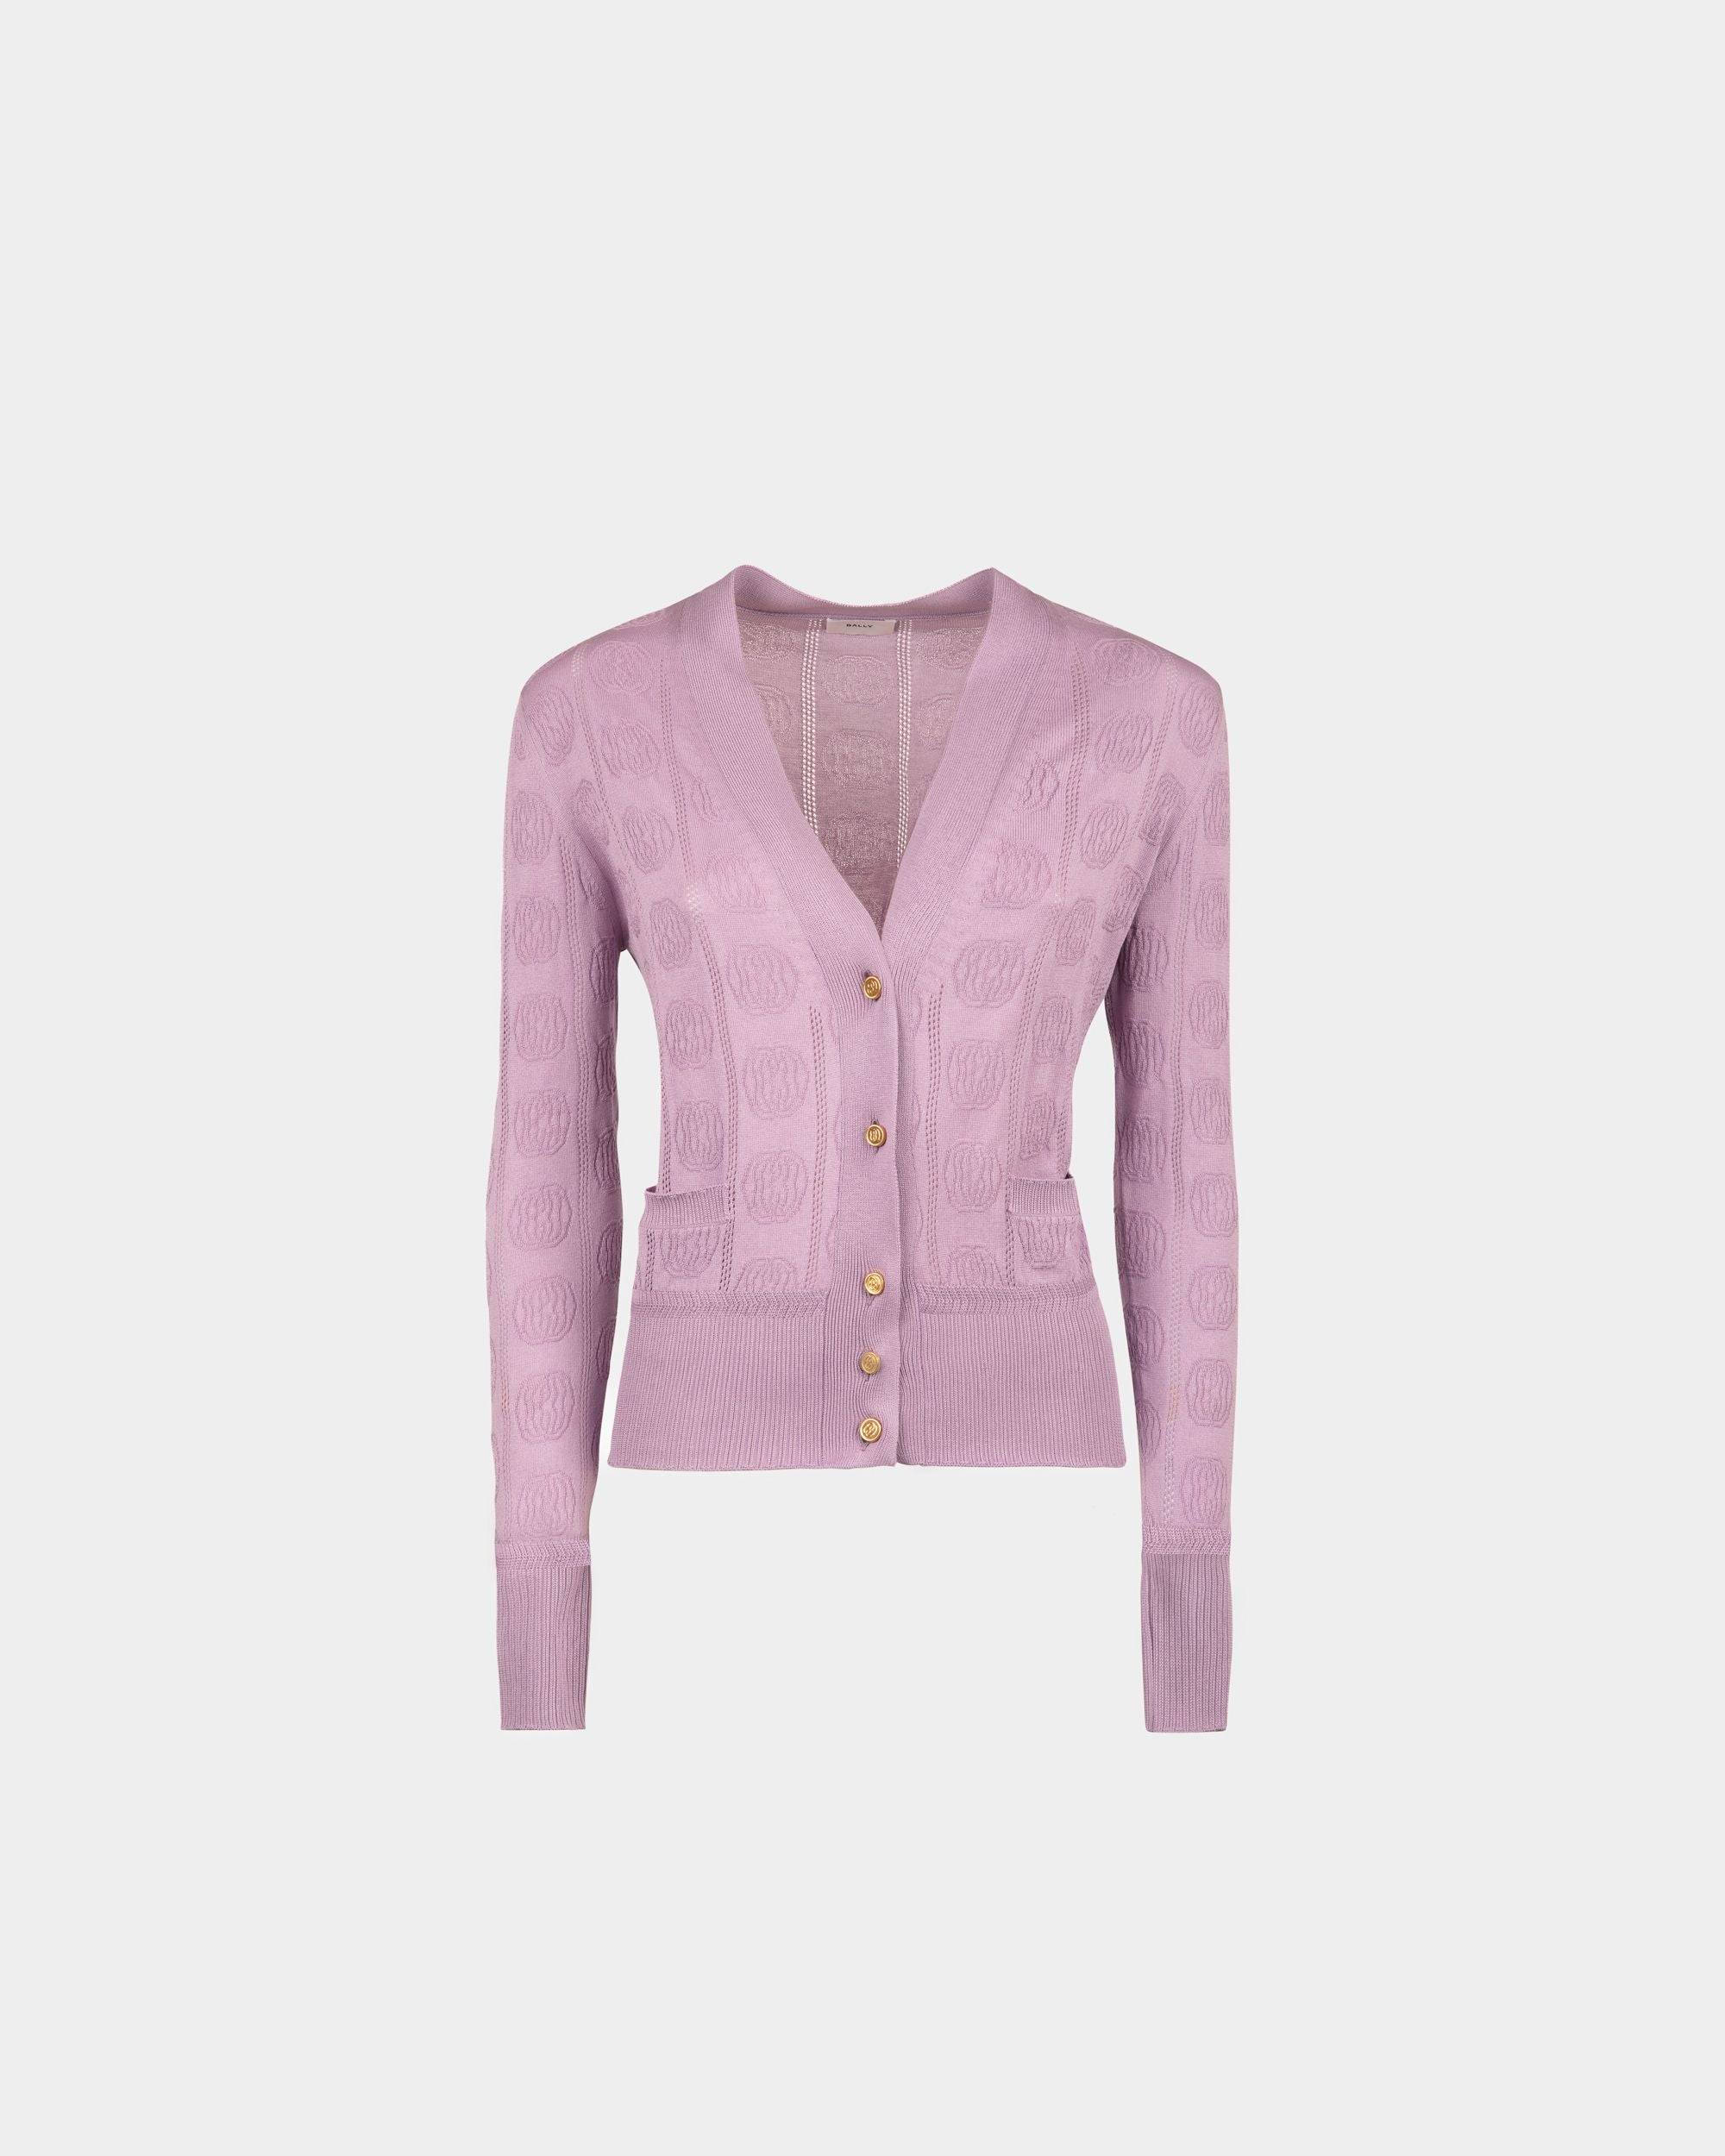 Women's Lilac Cardigan in a Silk Blend | Bally | Still Life Front